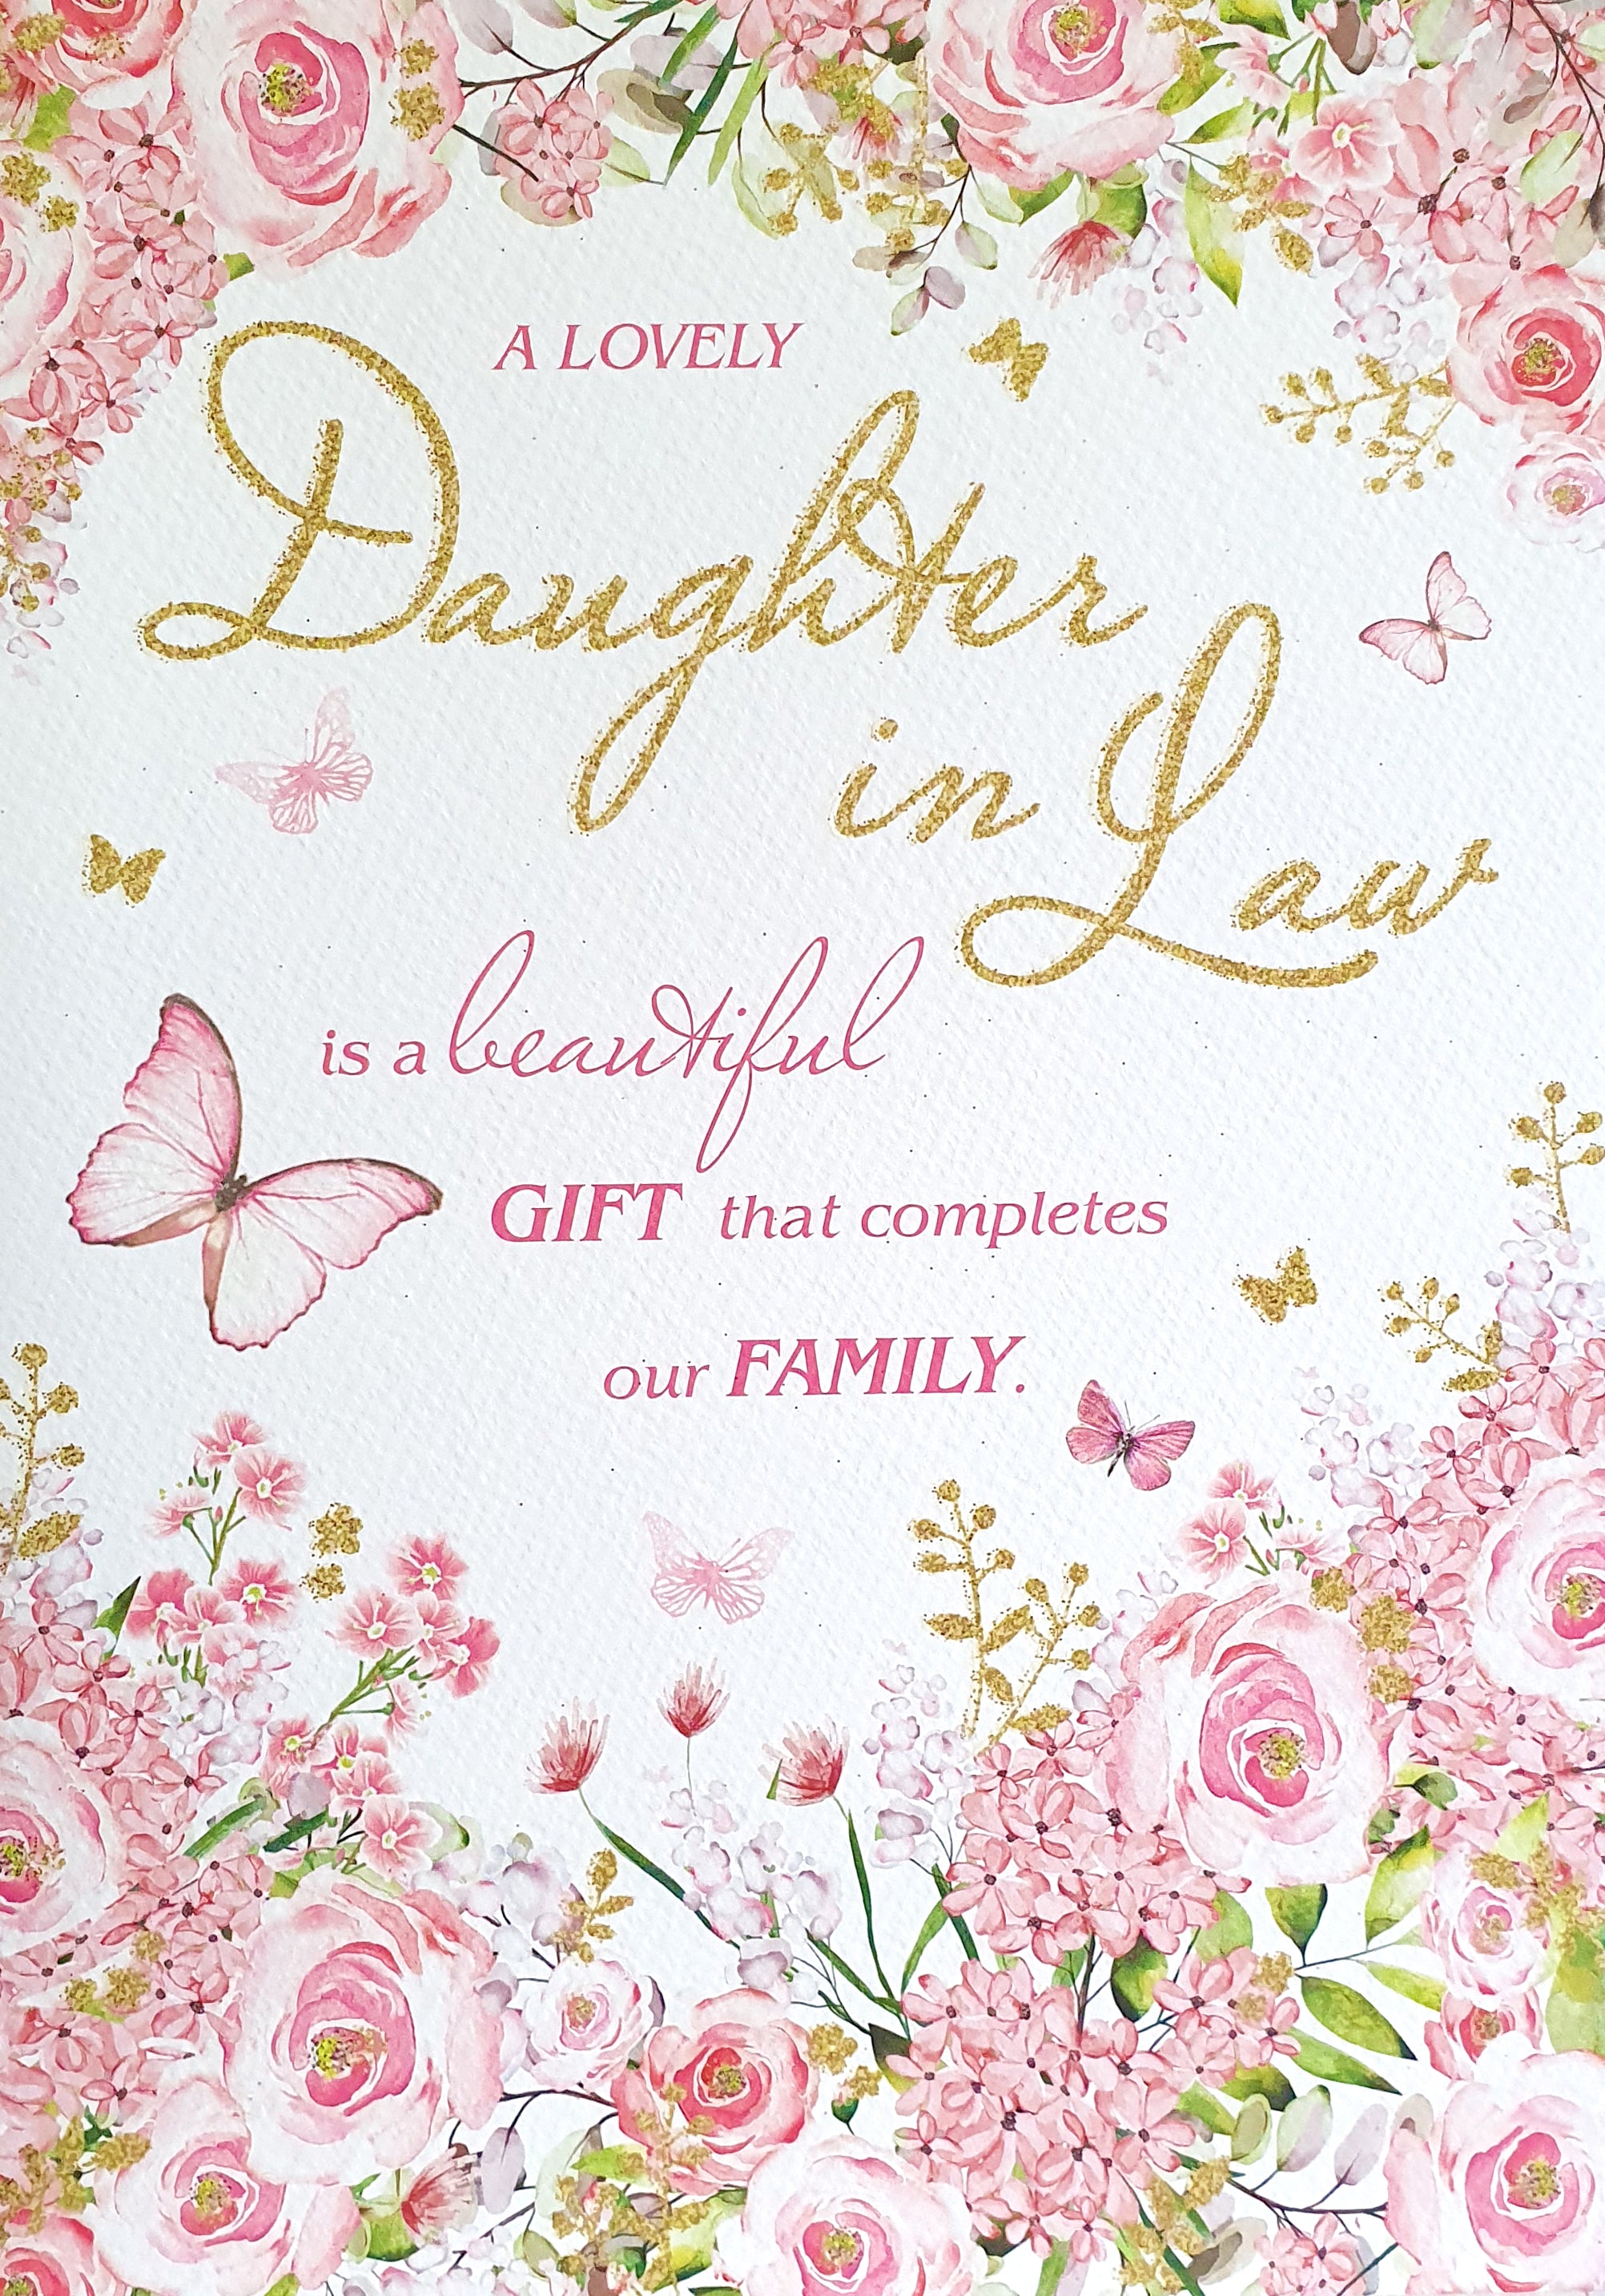 Daughter-in-Law Birthday Card - Flowers and Butterfly